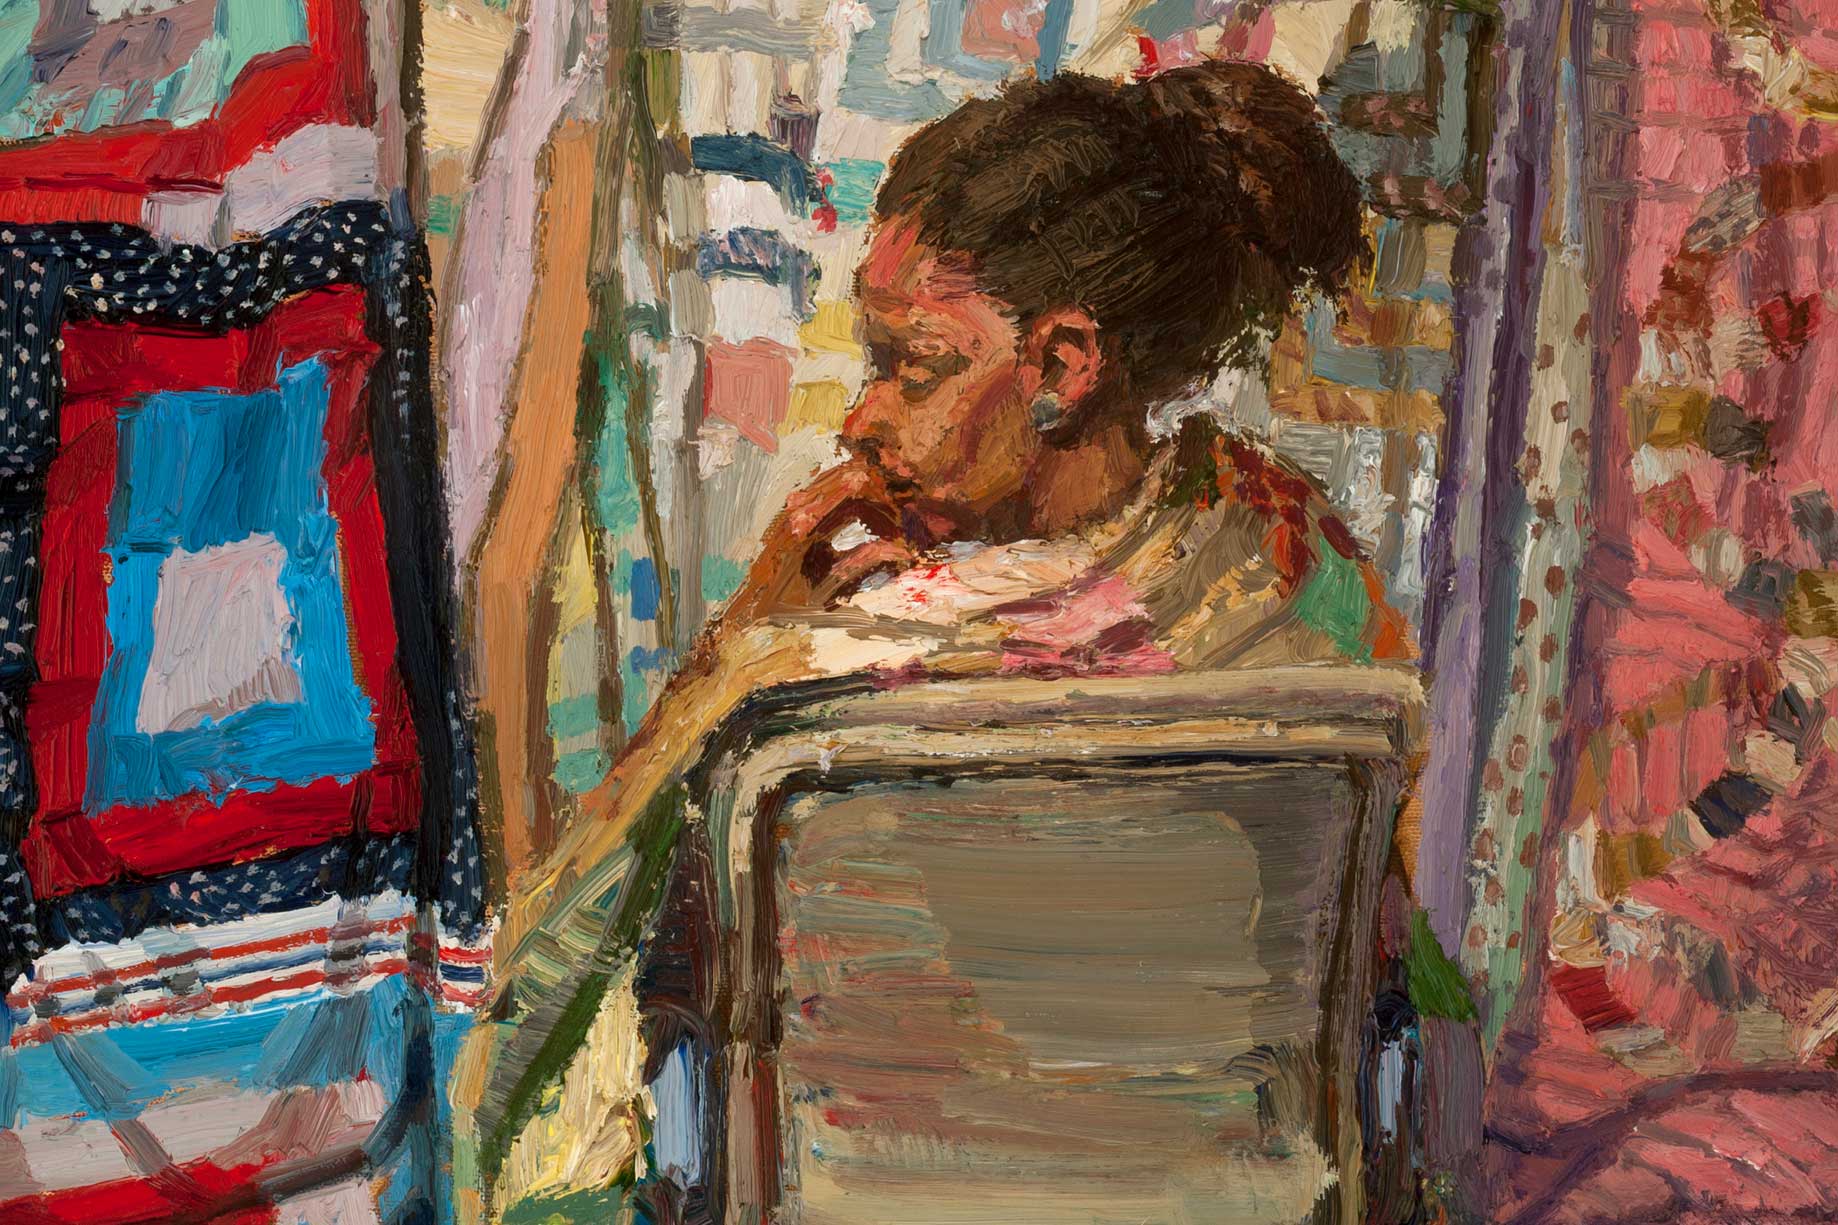 Sedrick Huckaby, She Wore Her Family’s Quilt, detail, 2015, oil on canvas. Photo by Gregory Staley, © Sedrick Huckaby